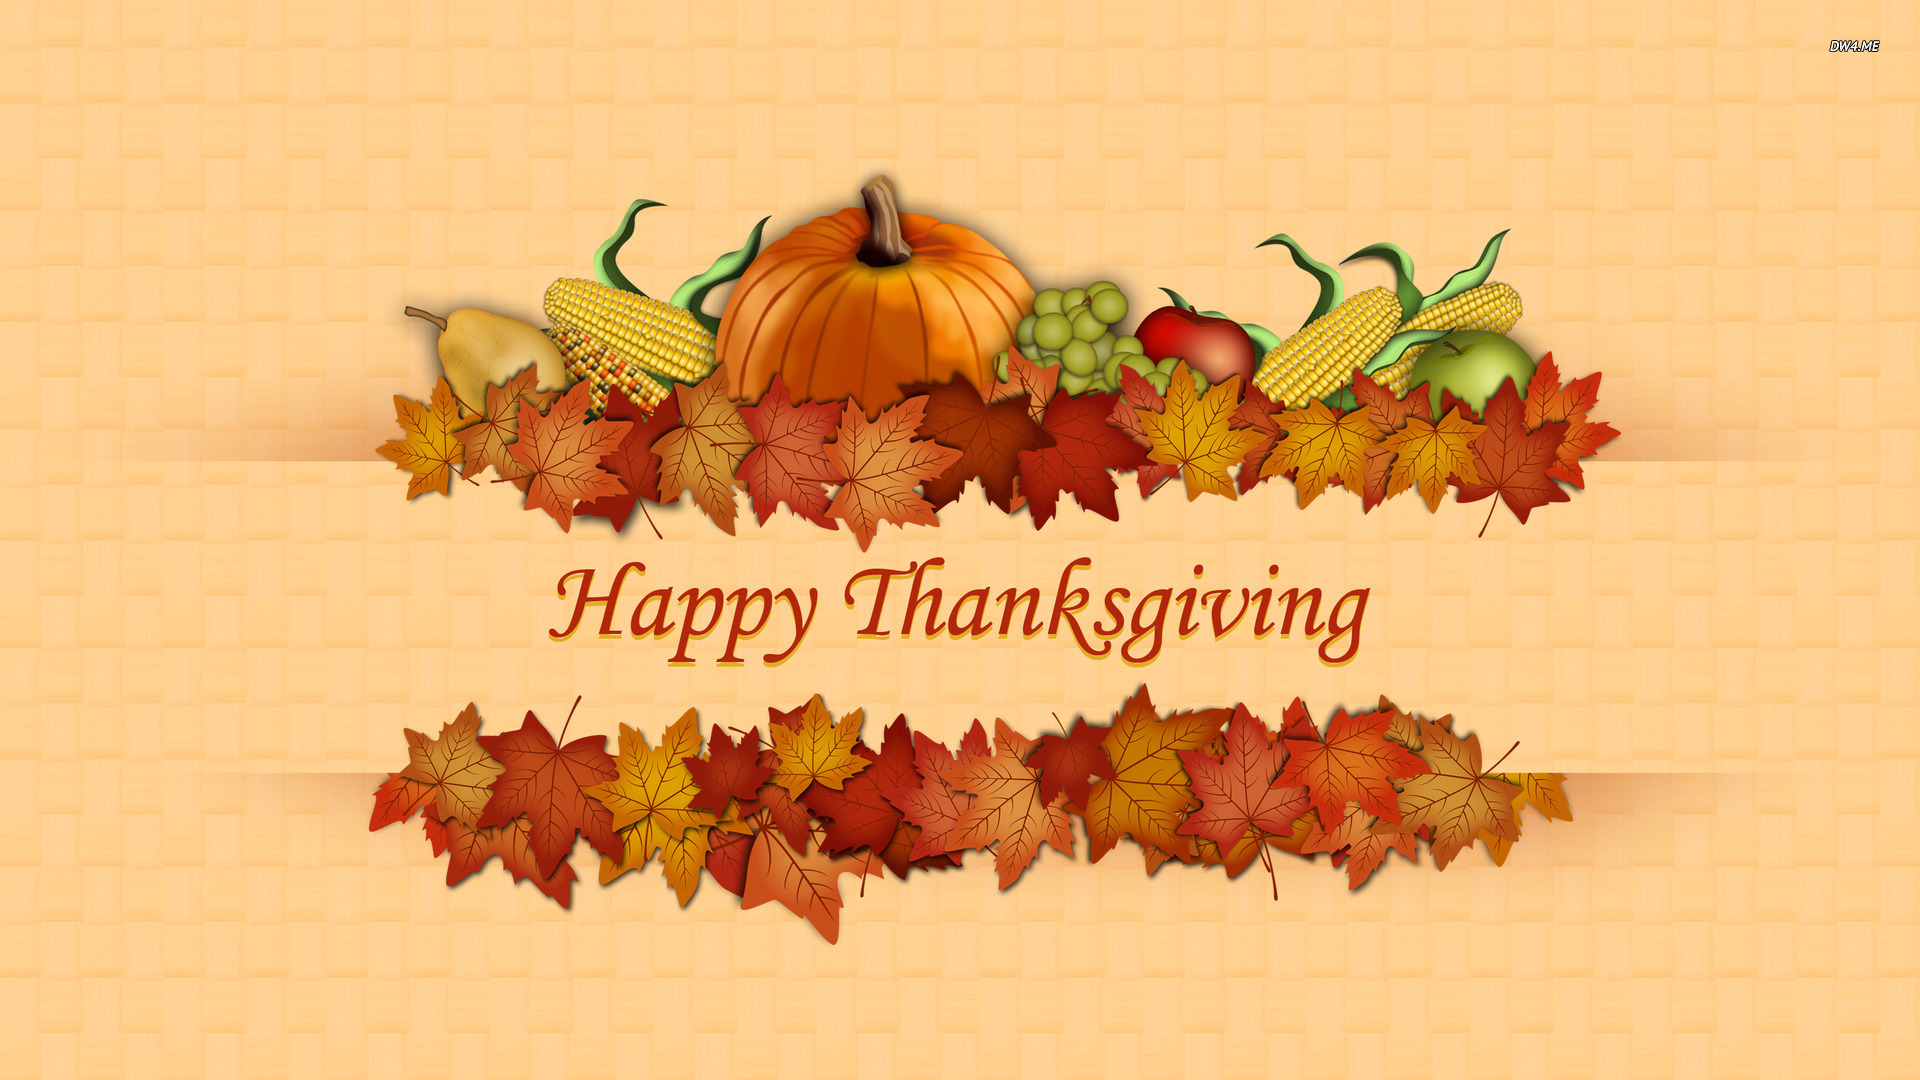 Happy Thanksgiving Wallpaper Image Amp Pictures Becuo